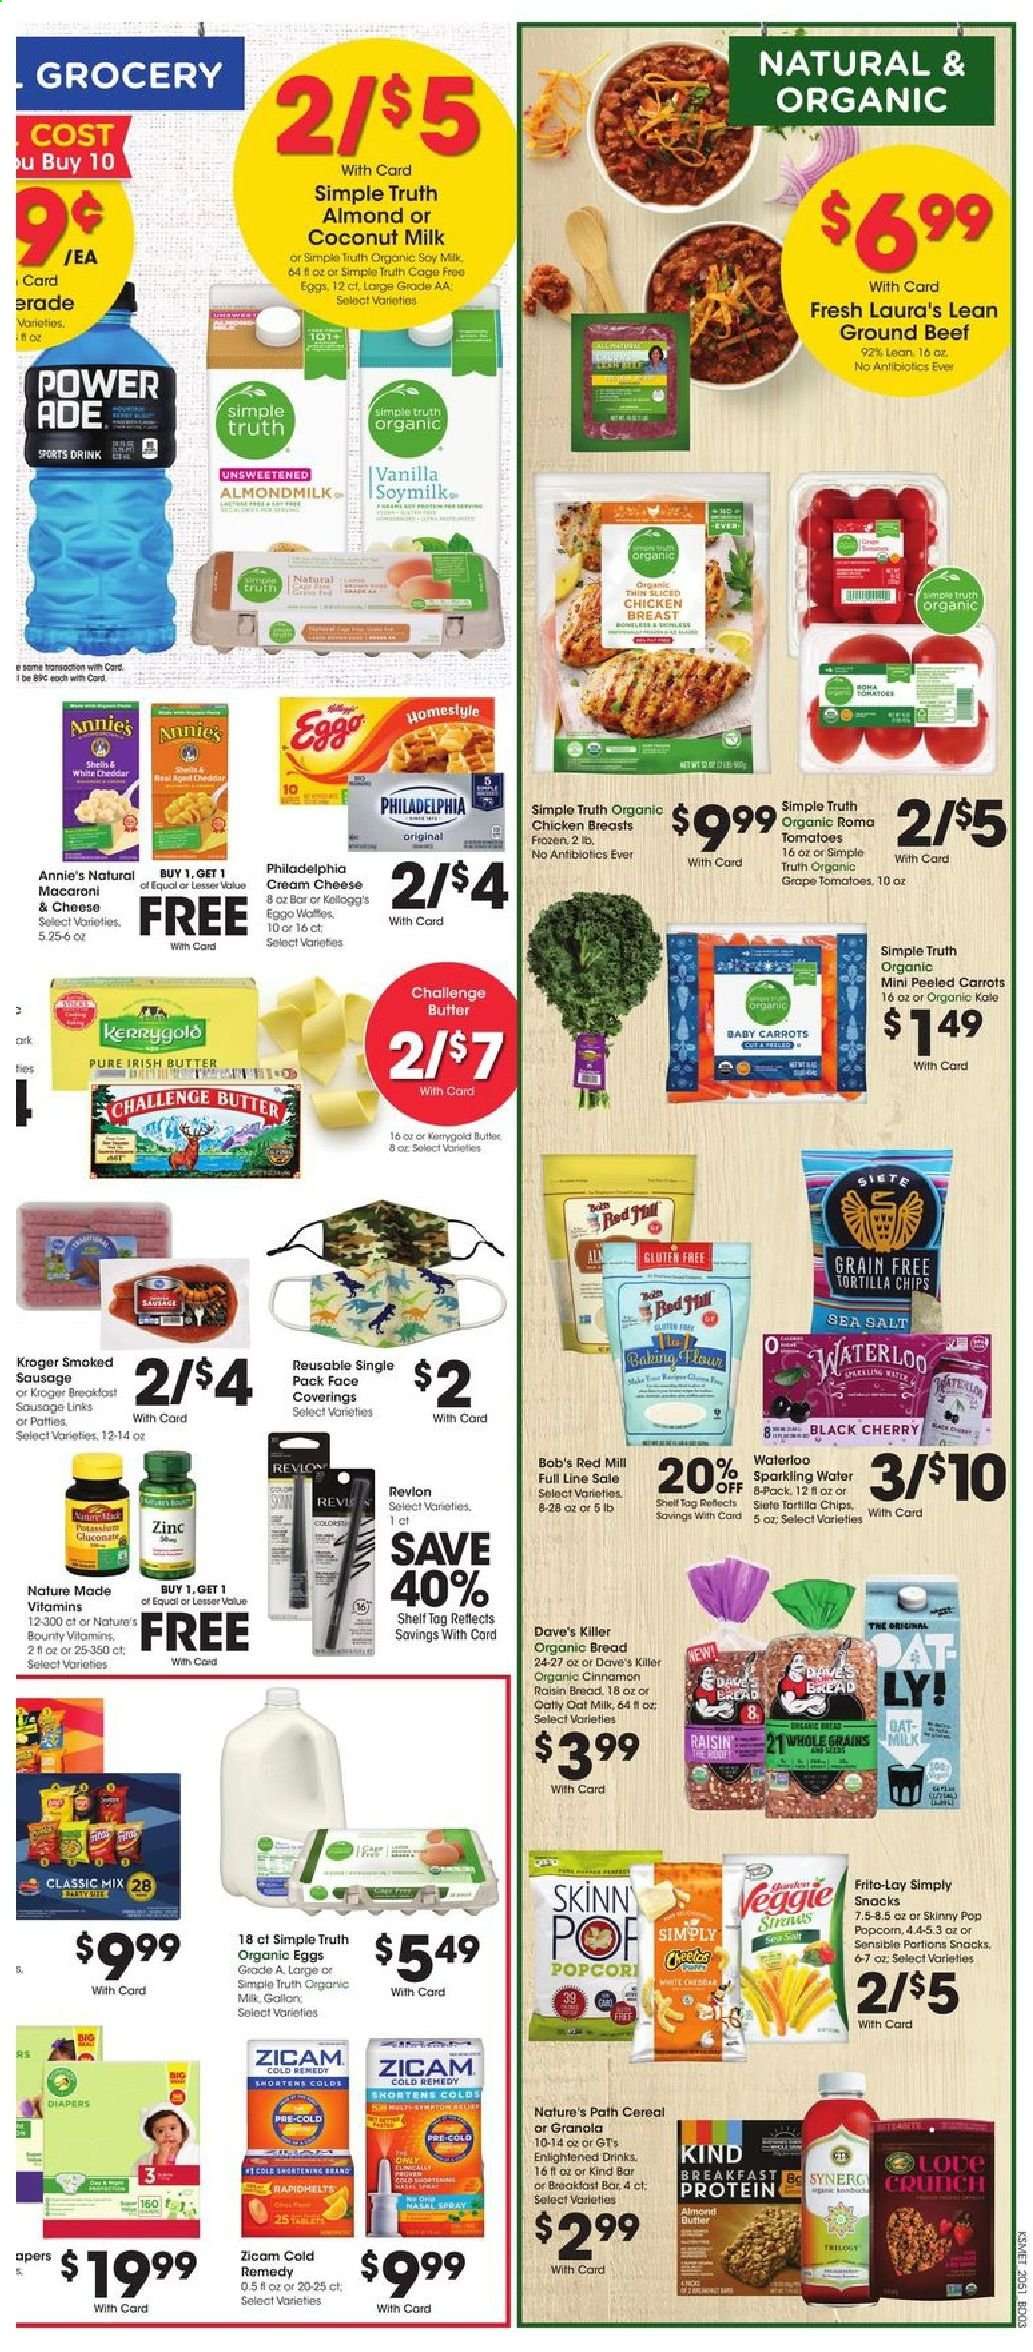 thumbnail - King Soopers Flyer - 01/20/2021 - 01/26/2021 - Sales products - gallon, bread, cream cheese, Annie's, sausage, smoked sausage, Philadelphia, cheddar, almond milk, soy milk, organic milk, oat milk, eggs, cage free eggs, irish butter, Enlightened lce Cream, carrots, Bounty, Kellogg's, tortilla chips, snack, popcorn, Frito-Lay, Skinny Pop, flour, oats, sea salt, coconut milk, cereals, granola, macaroni, raisins, sparkling water, chicken breasts, beef meat, ground beef, Revlon, Nature Made, Nature's Bounty, zinc. Page 5.